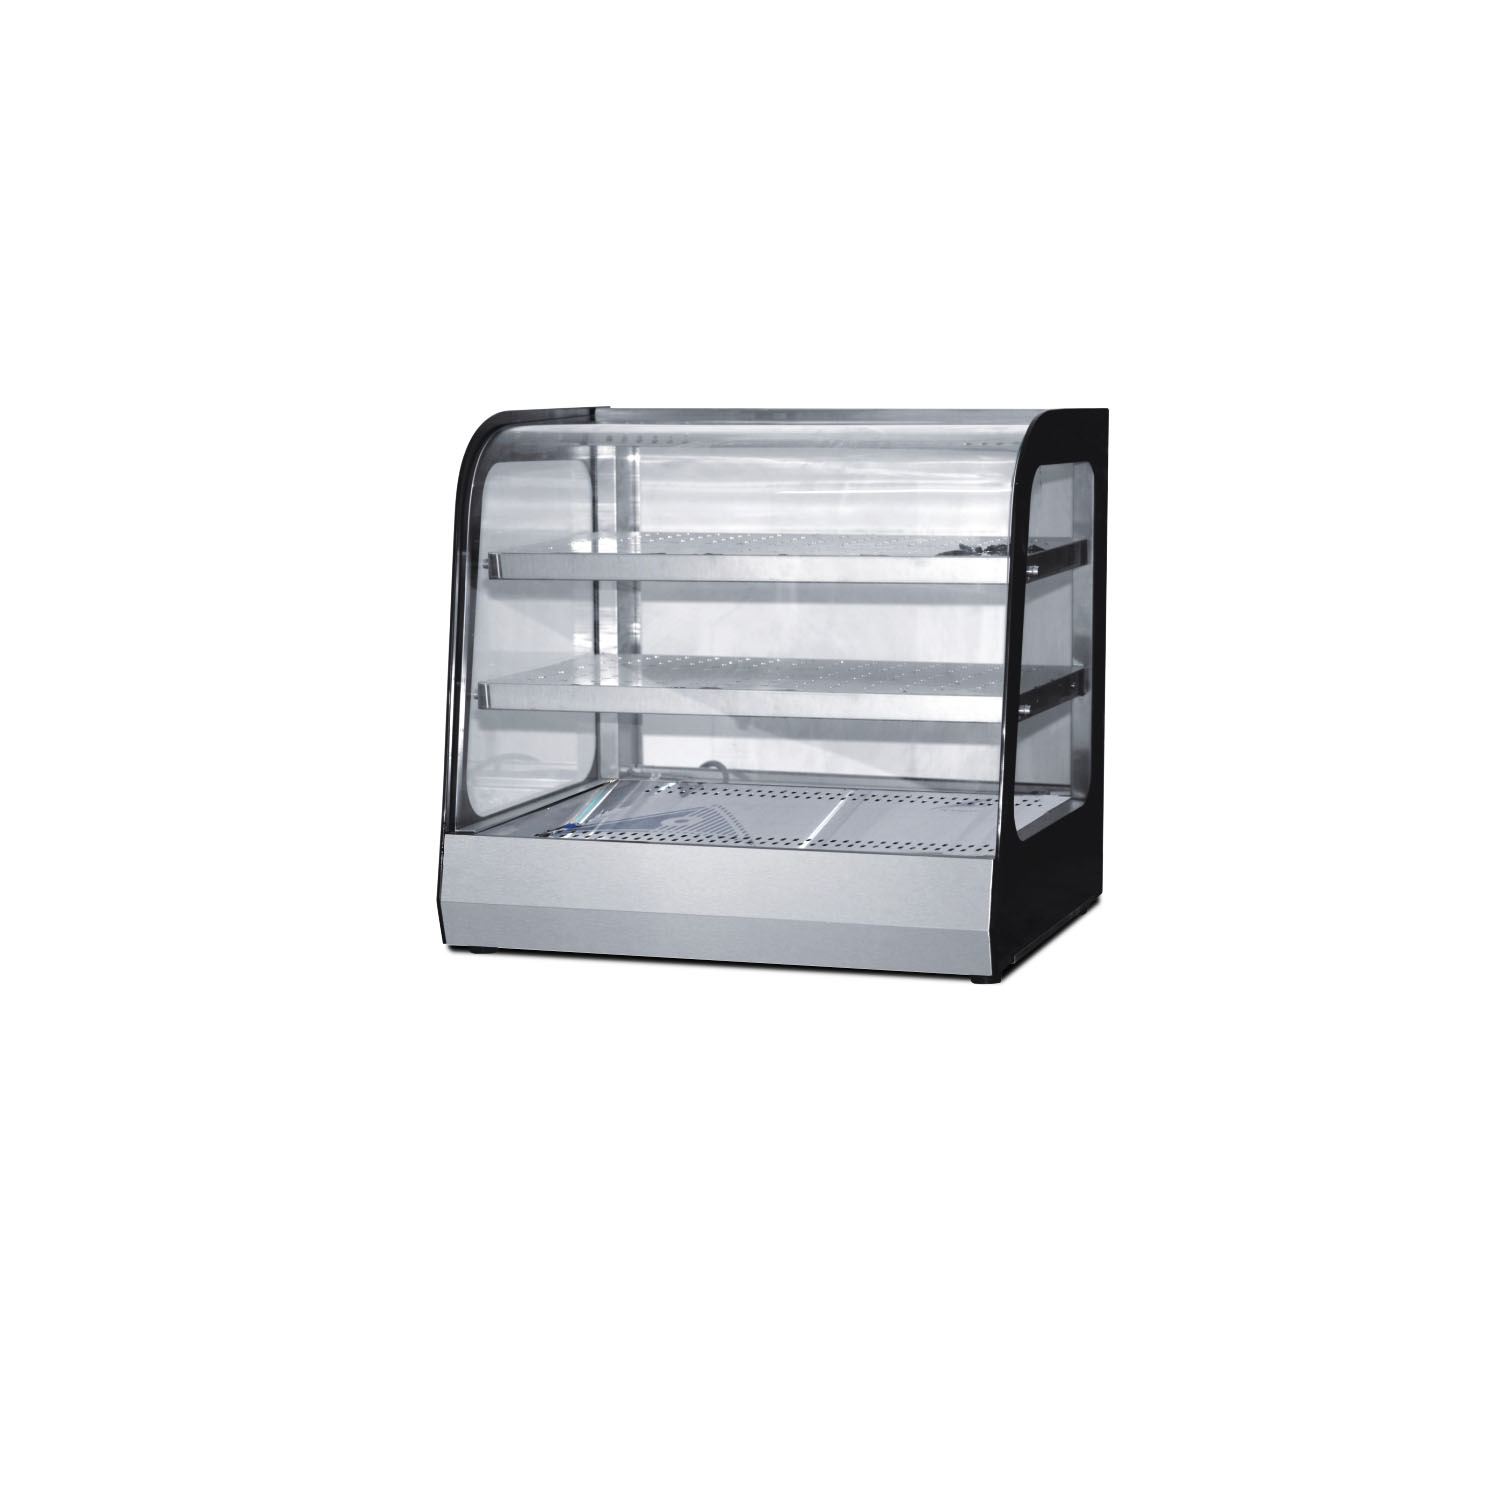 https://media.twothousand.com/catalog/product/c/o/commercial_food_warmer_display_case_tt-we1800a_2_.jpg